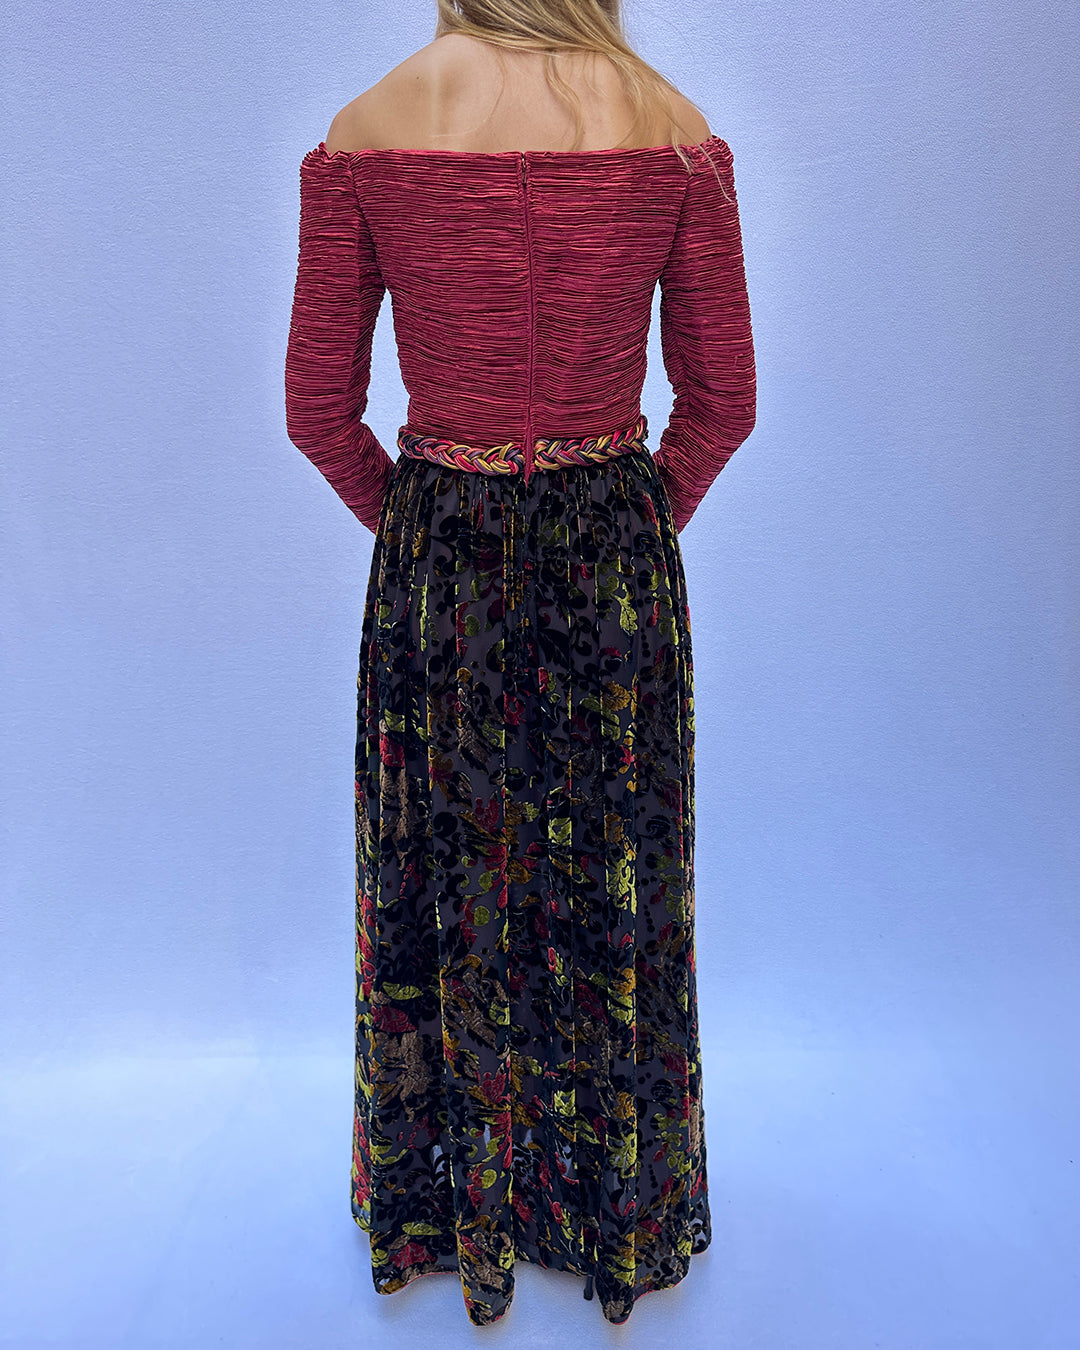 1970s MARY MCFADDEN COUTURE OFF THE SHOULDER GOWN | S-M